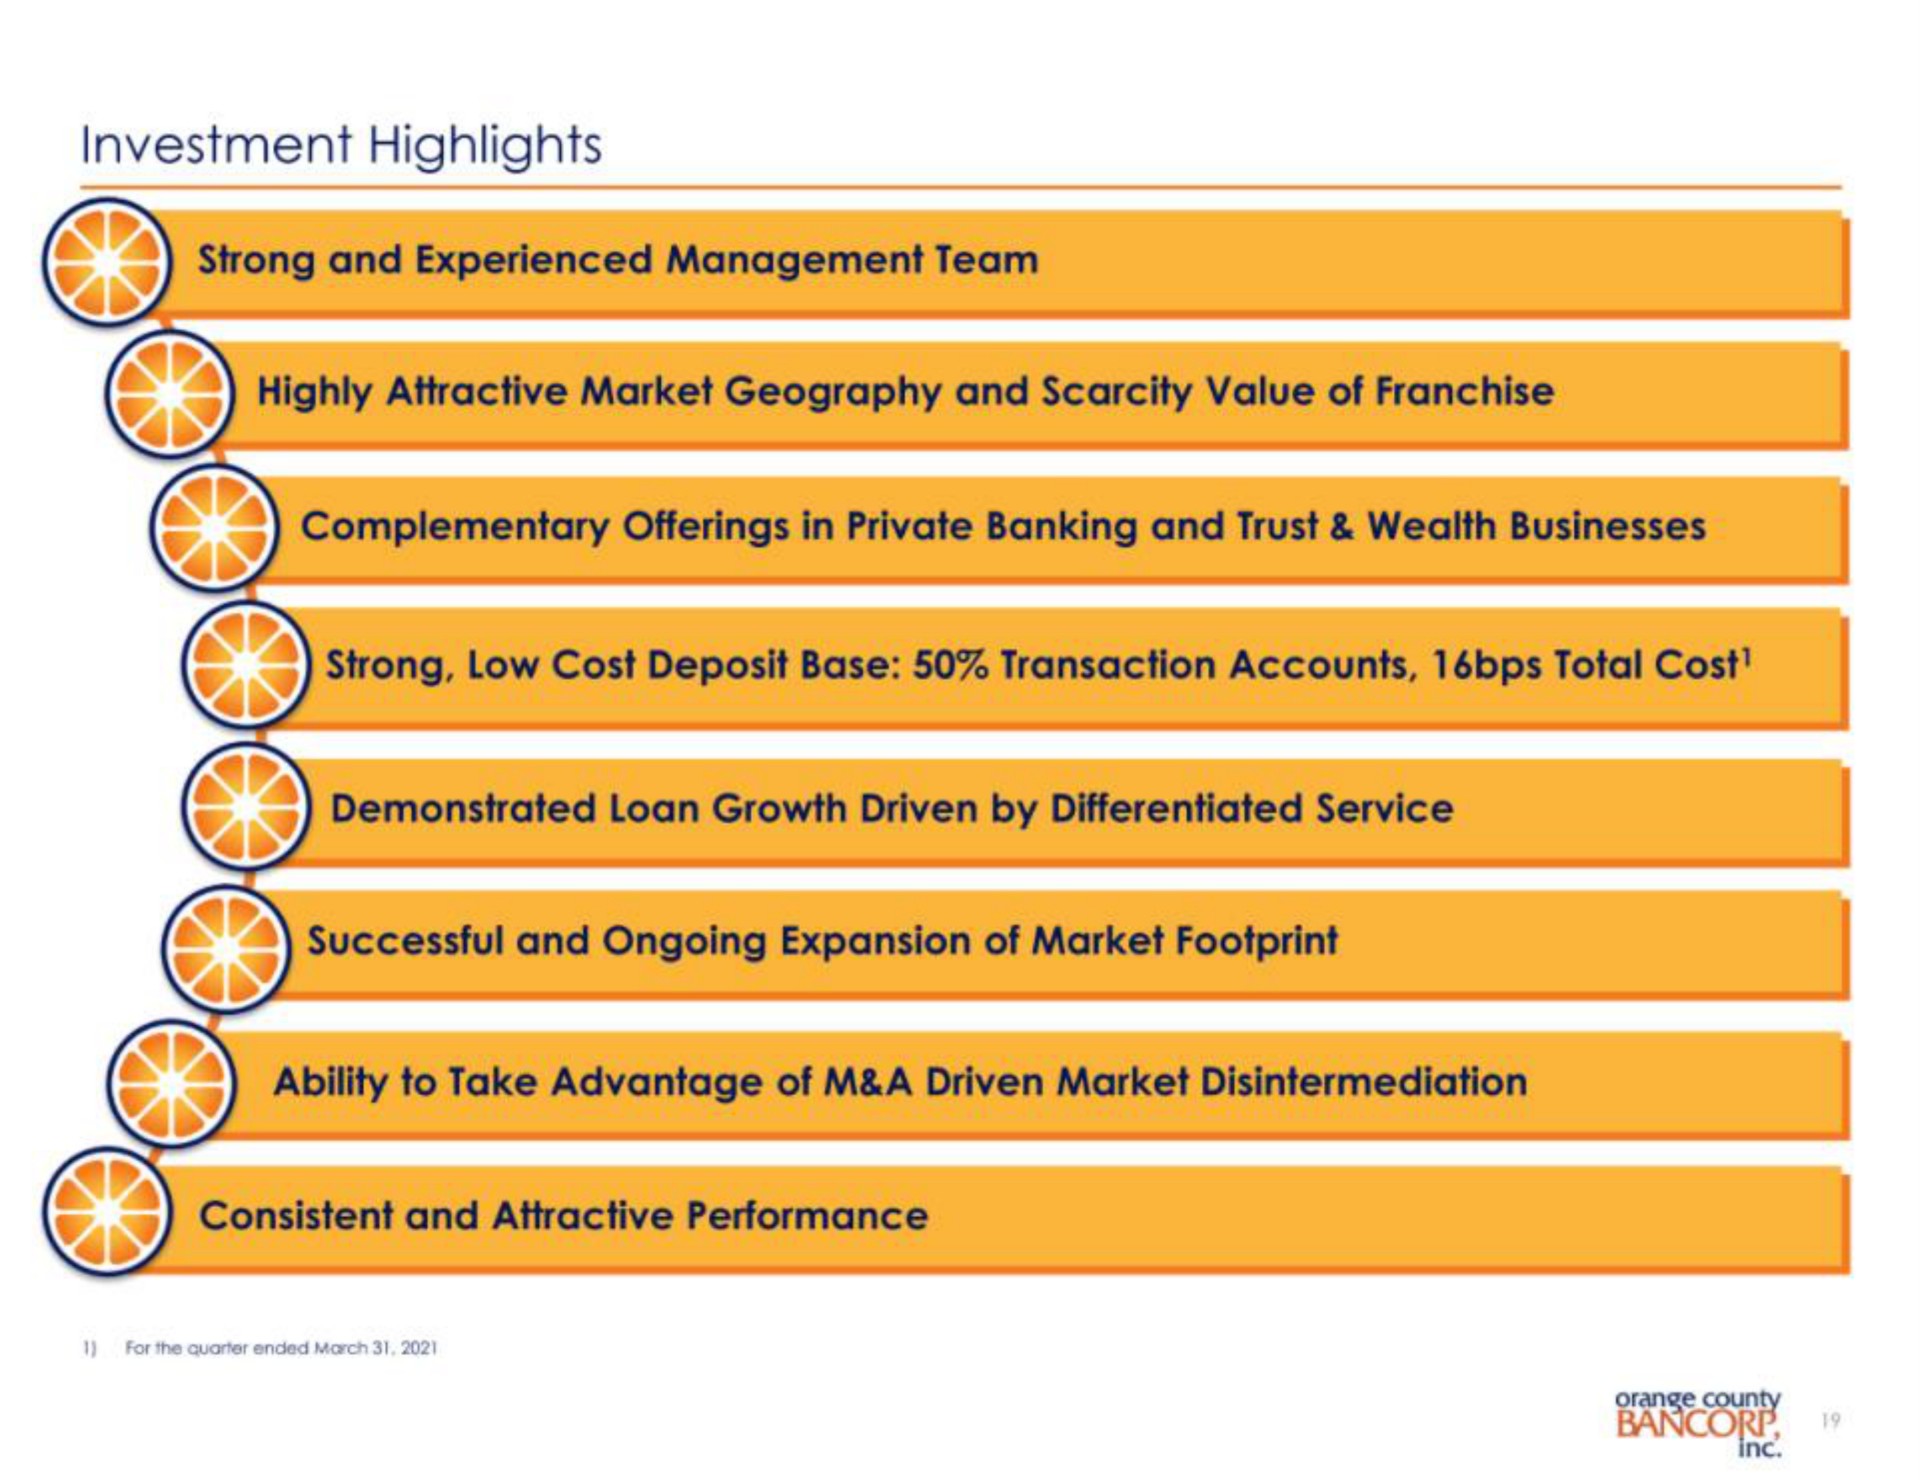 investment highlights | Orange County Bancorp